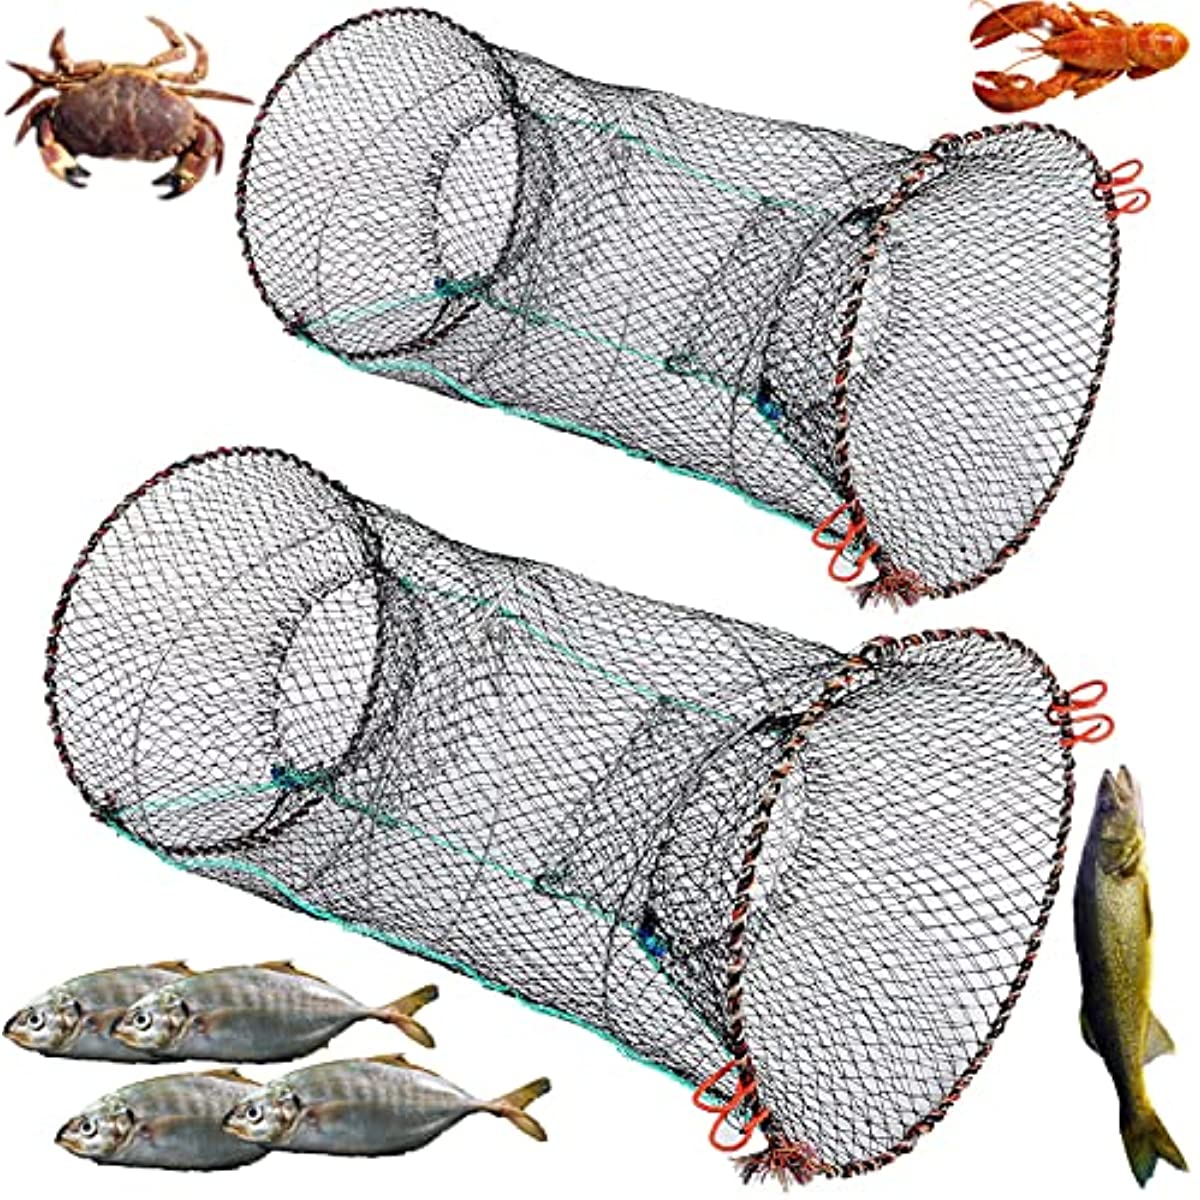 Noa Store Bait Trap for Fishing | Fish Traps for Fishing Foldable | Used as  Minnow Traps for Bait Fish, Catfish Trap, Pinfish Trap | Compact and